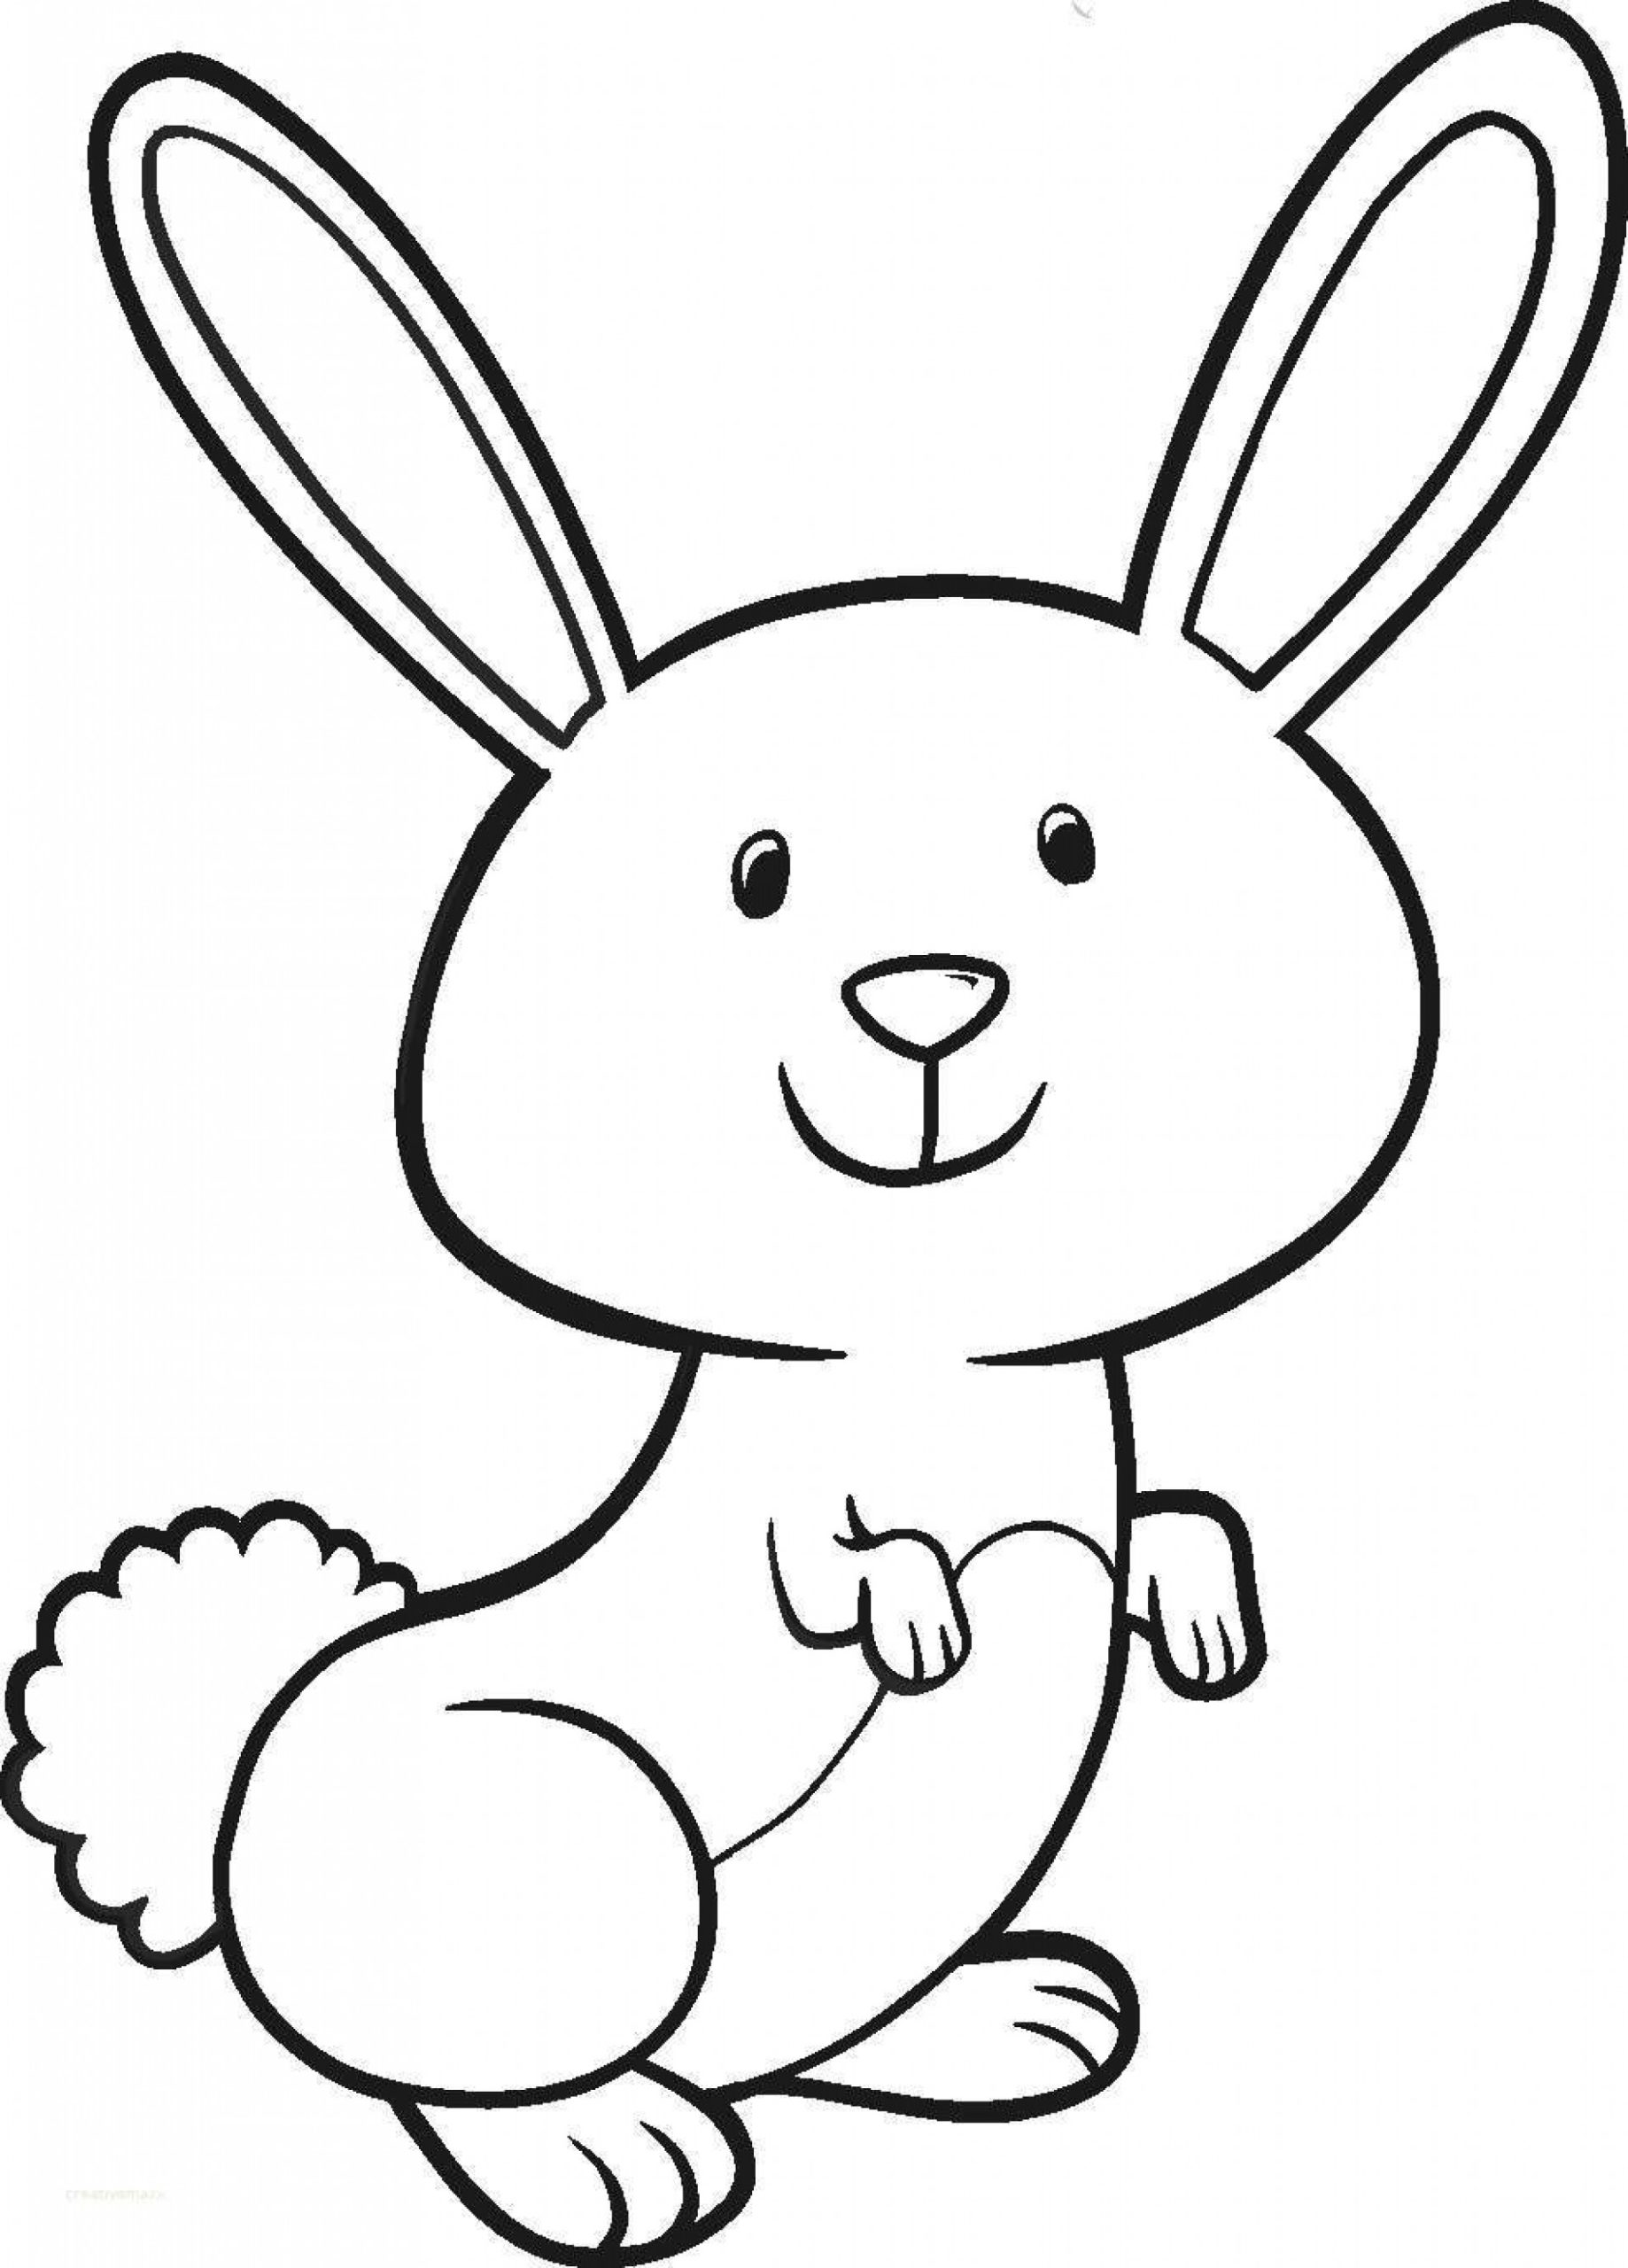 Cute bunny colouring image